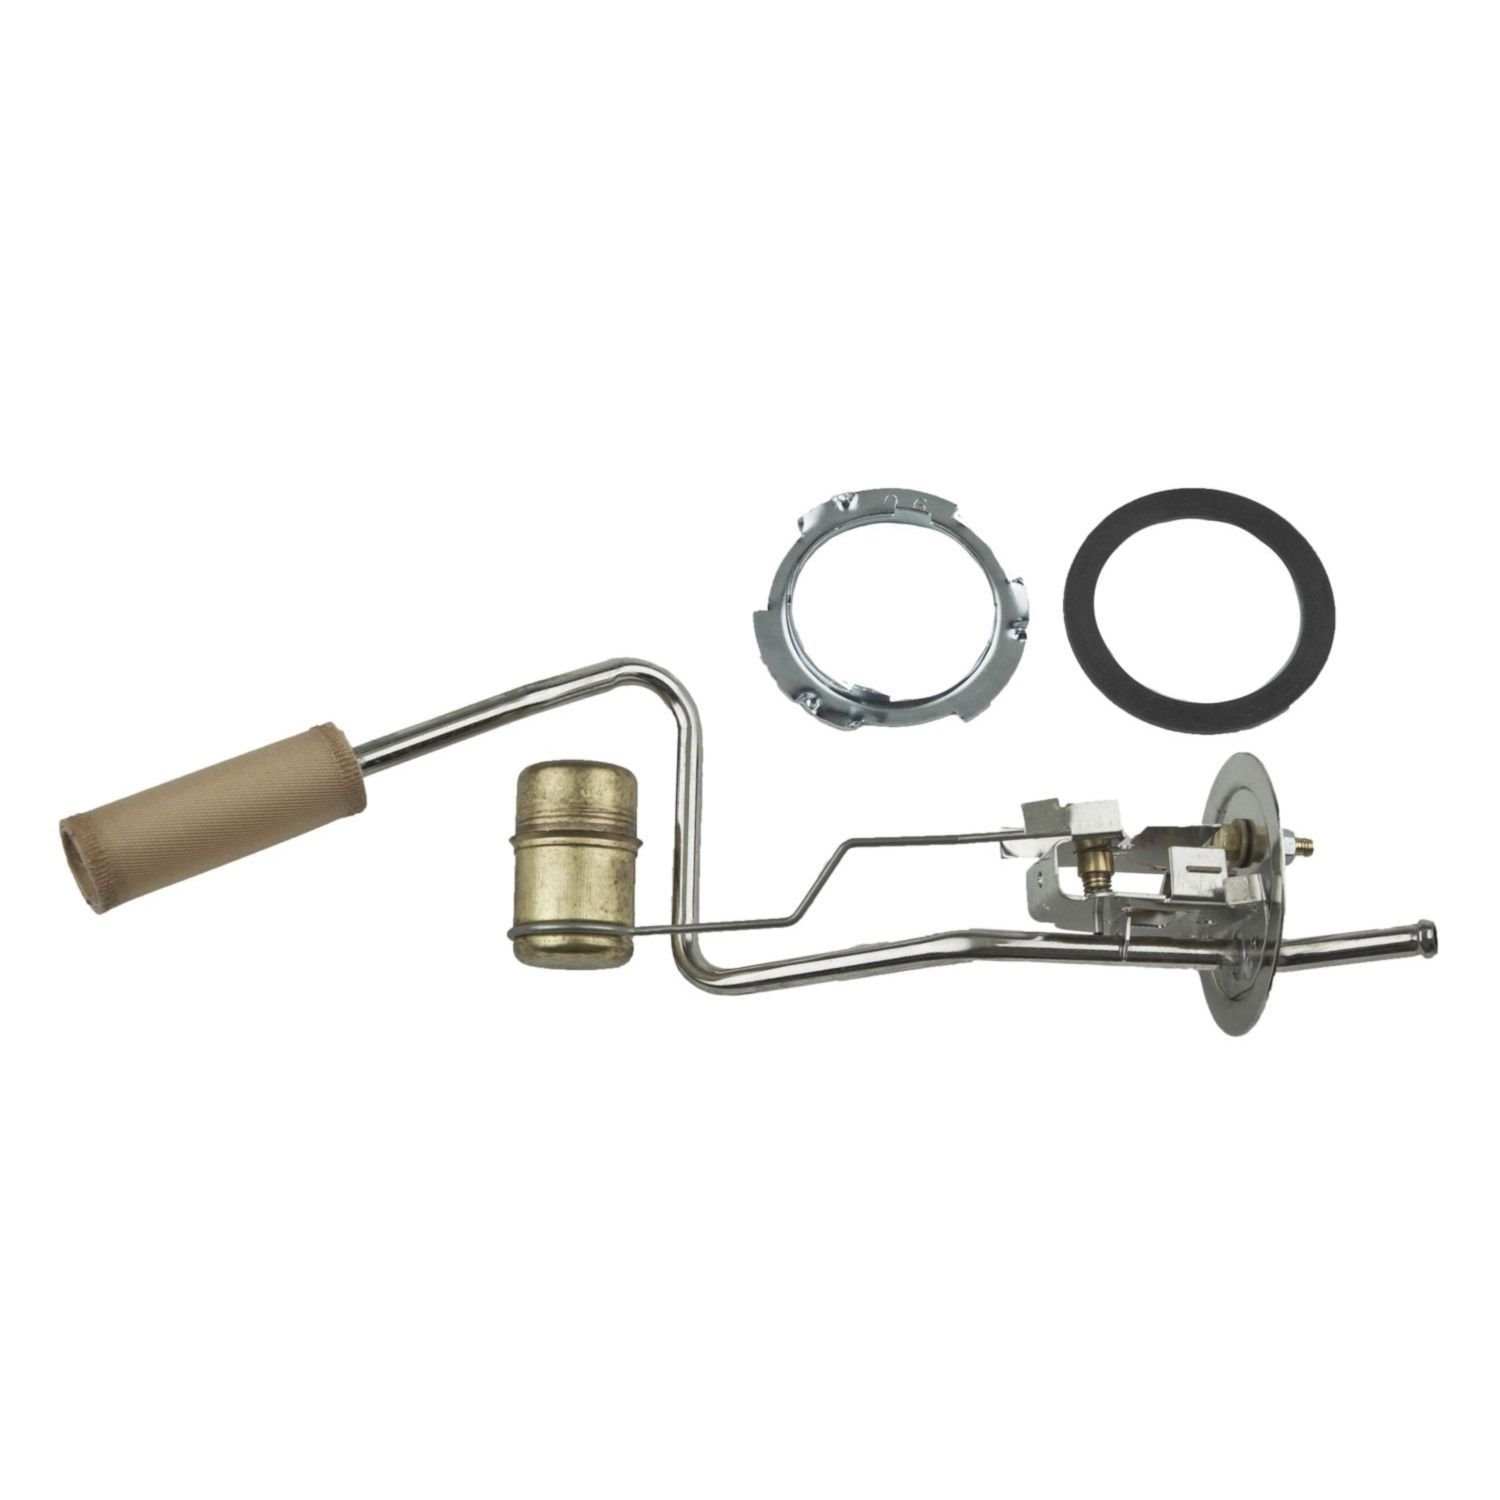 RSU6601 Replacement Fuel Tank Sending Unit 1966-1967 Dodge Charger, Coronet; Plymouth Belvedere, Satellite